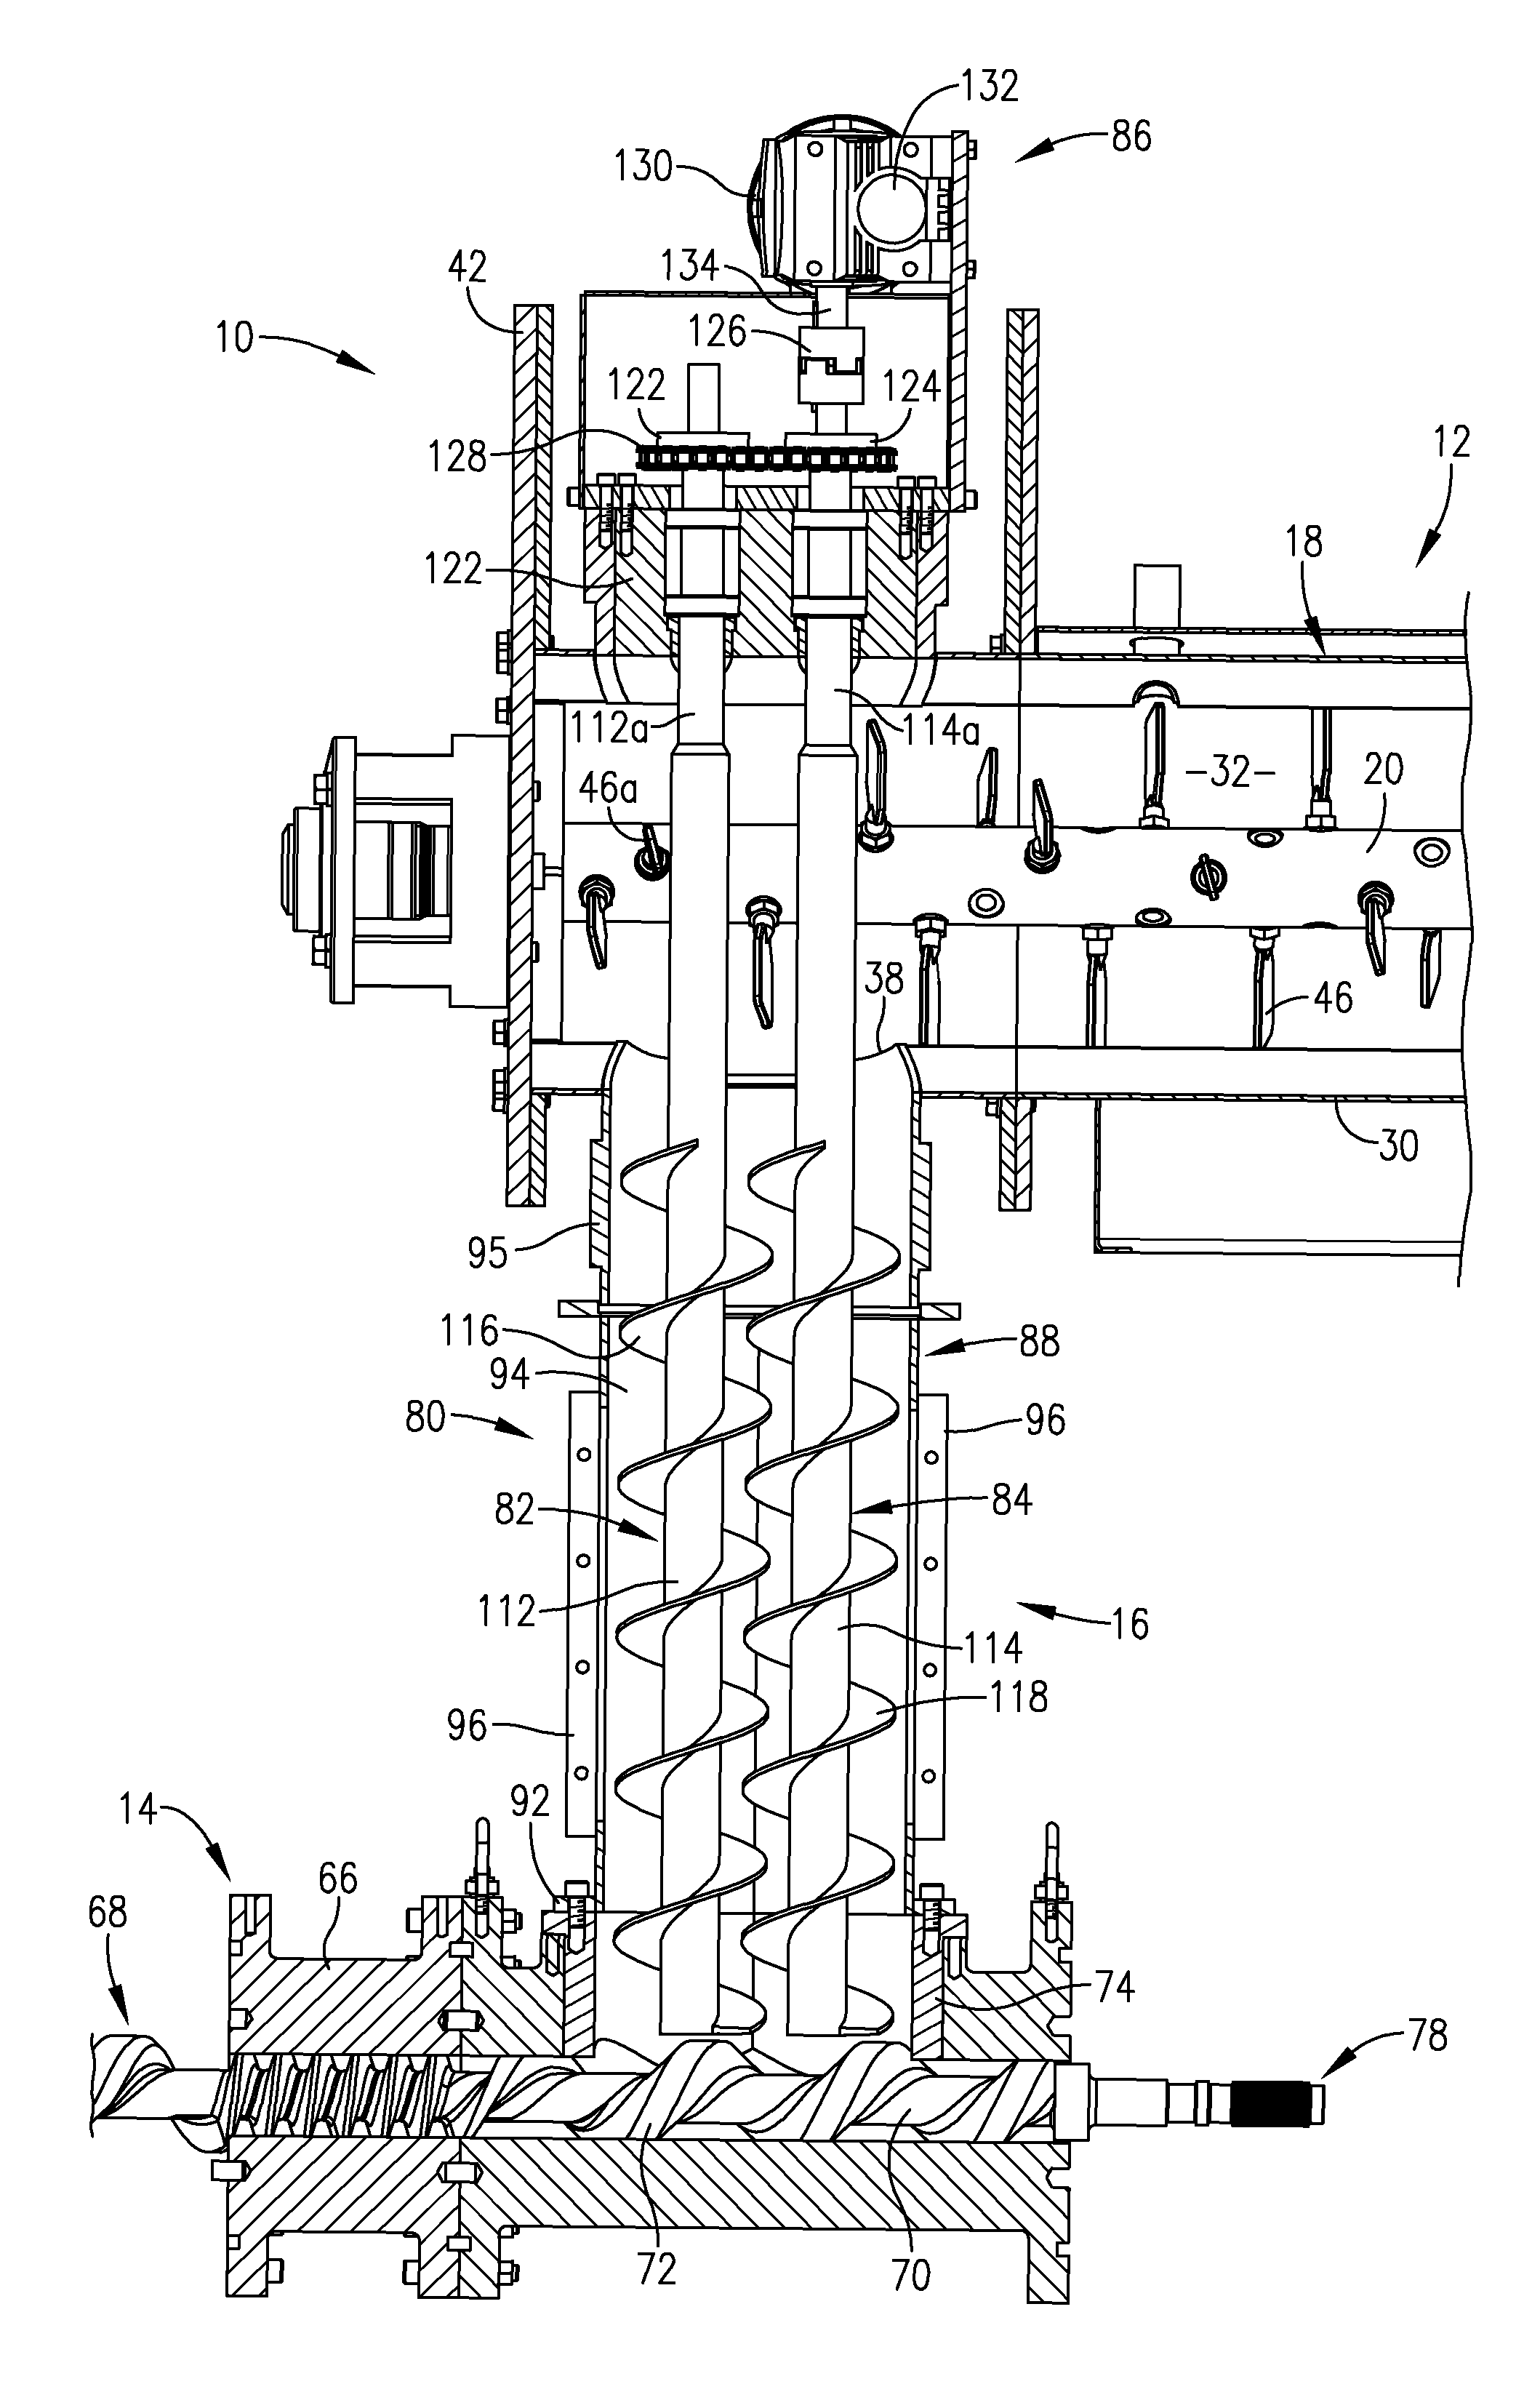 Method for positive feeding of preconditioned material into a twin screw extruder